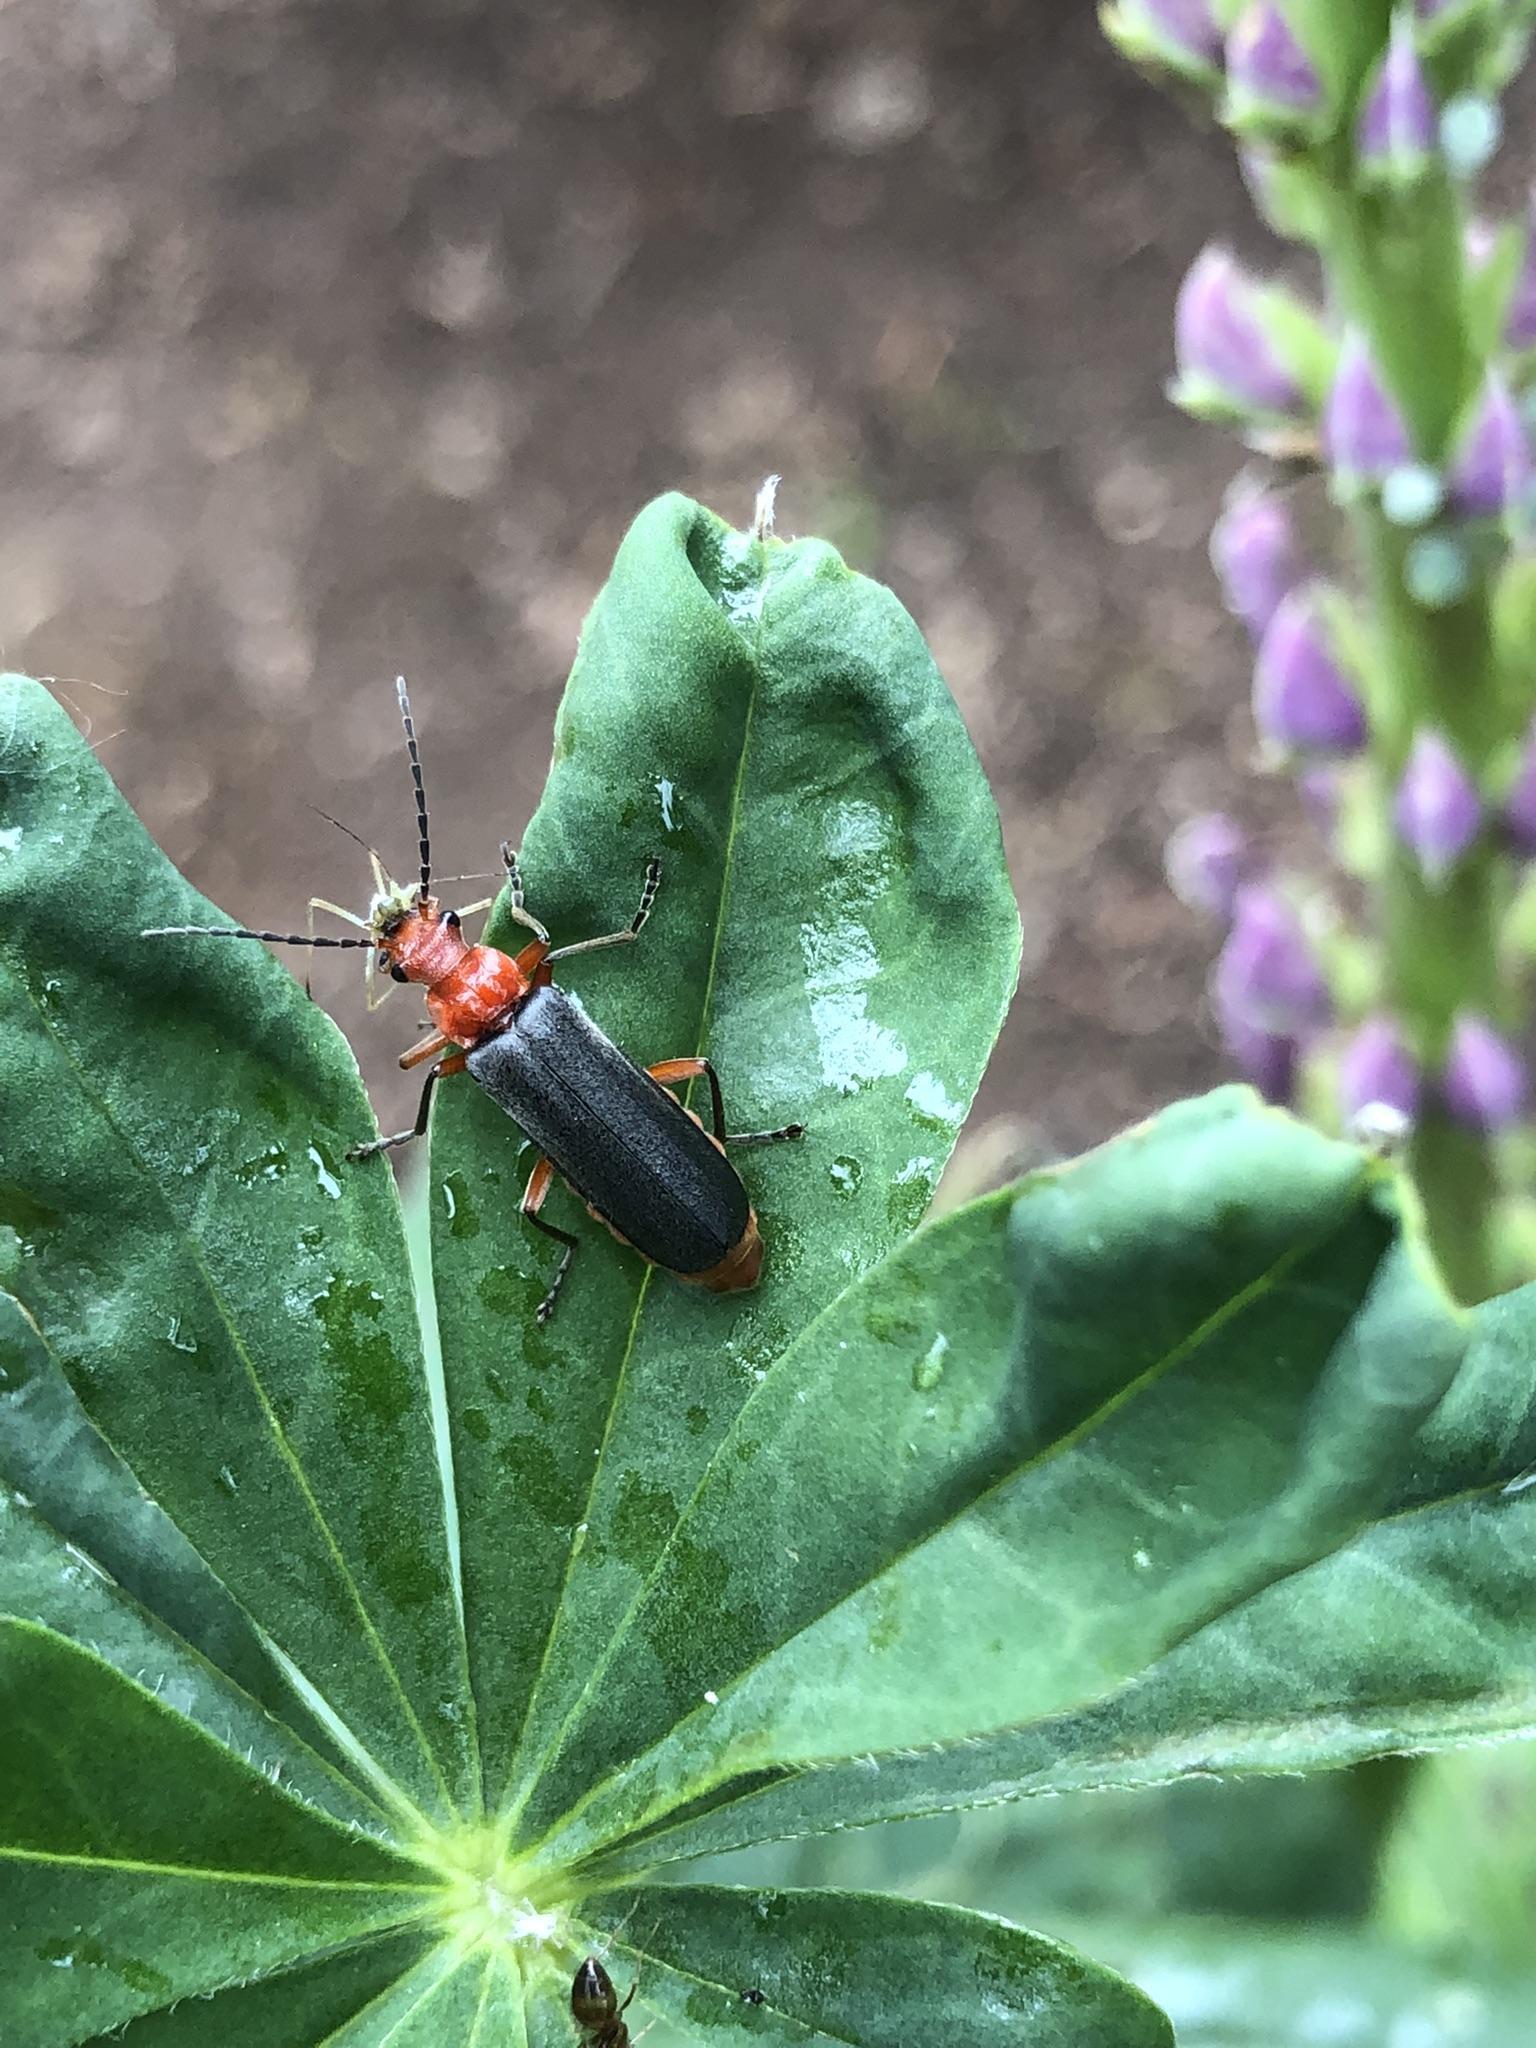 Soldier beetle with captured aphid